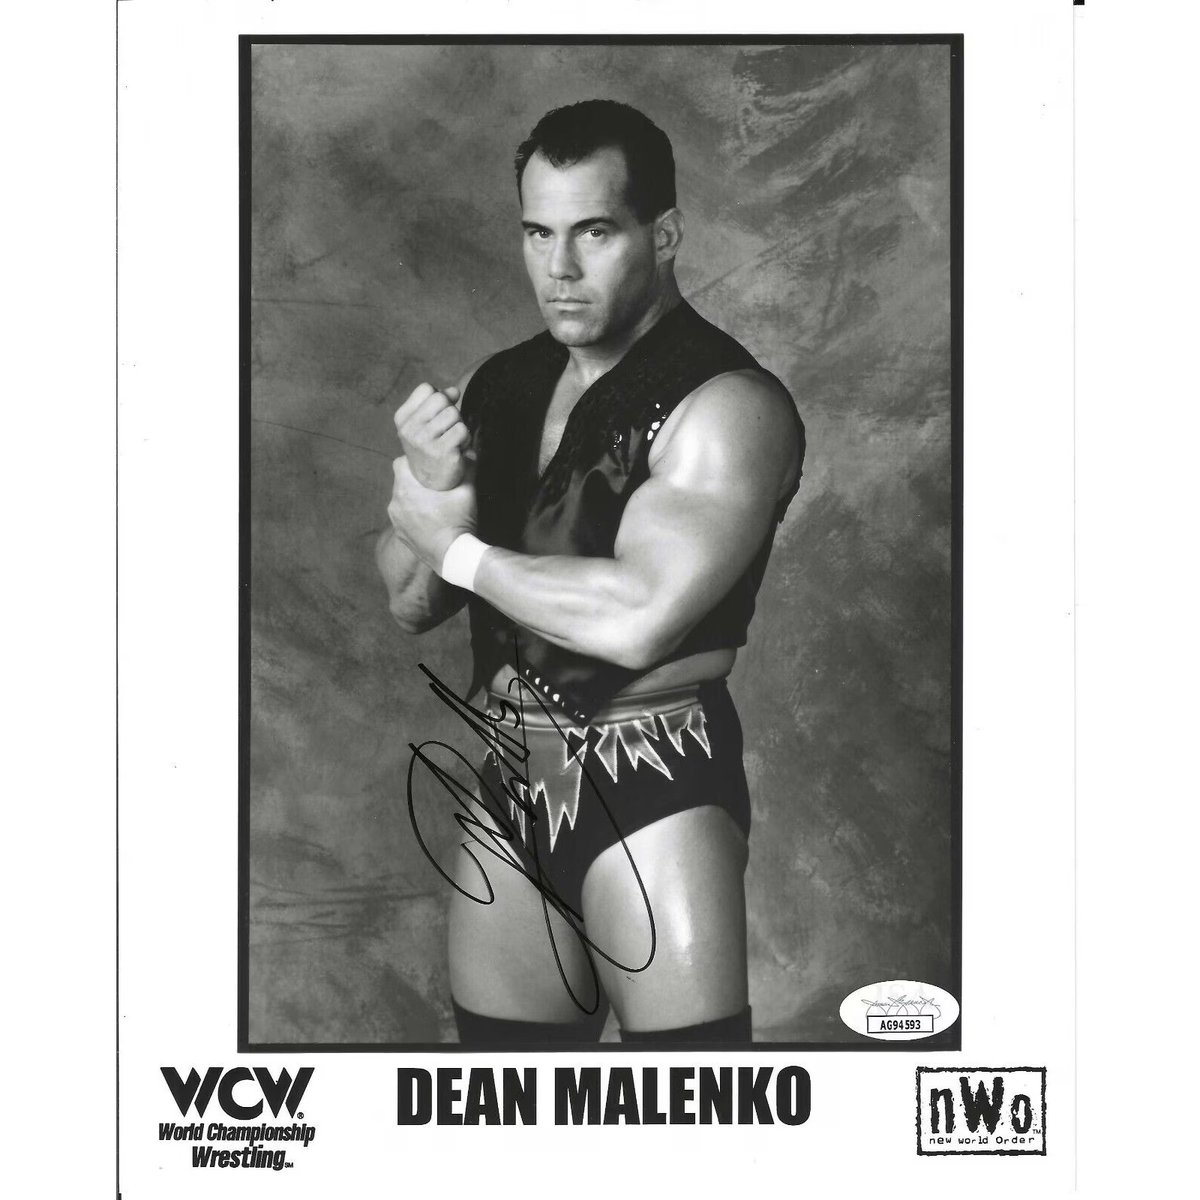 Warner Bros. Person of the Day is: 
Dean Simon AKA Dean Malenko from the World Championship Wrestling (WCW)  

#WarneroftheDay #WCW #WorldChampionWrestling #DeanMalenko #TurnerBroadcastingSystem